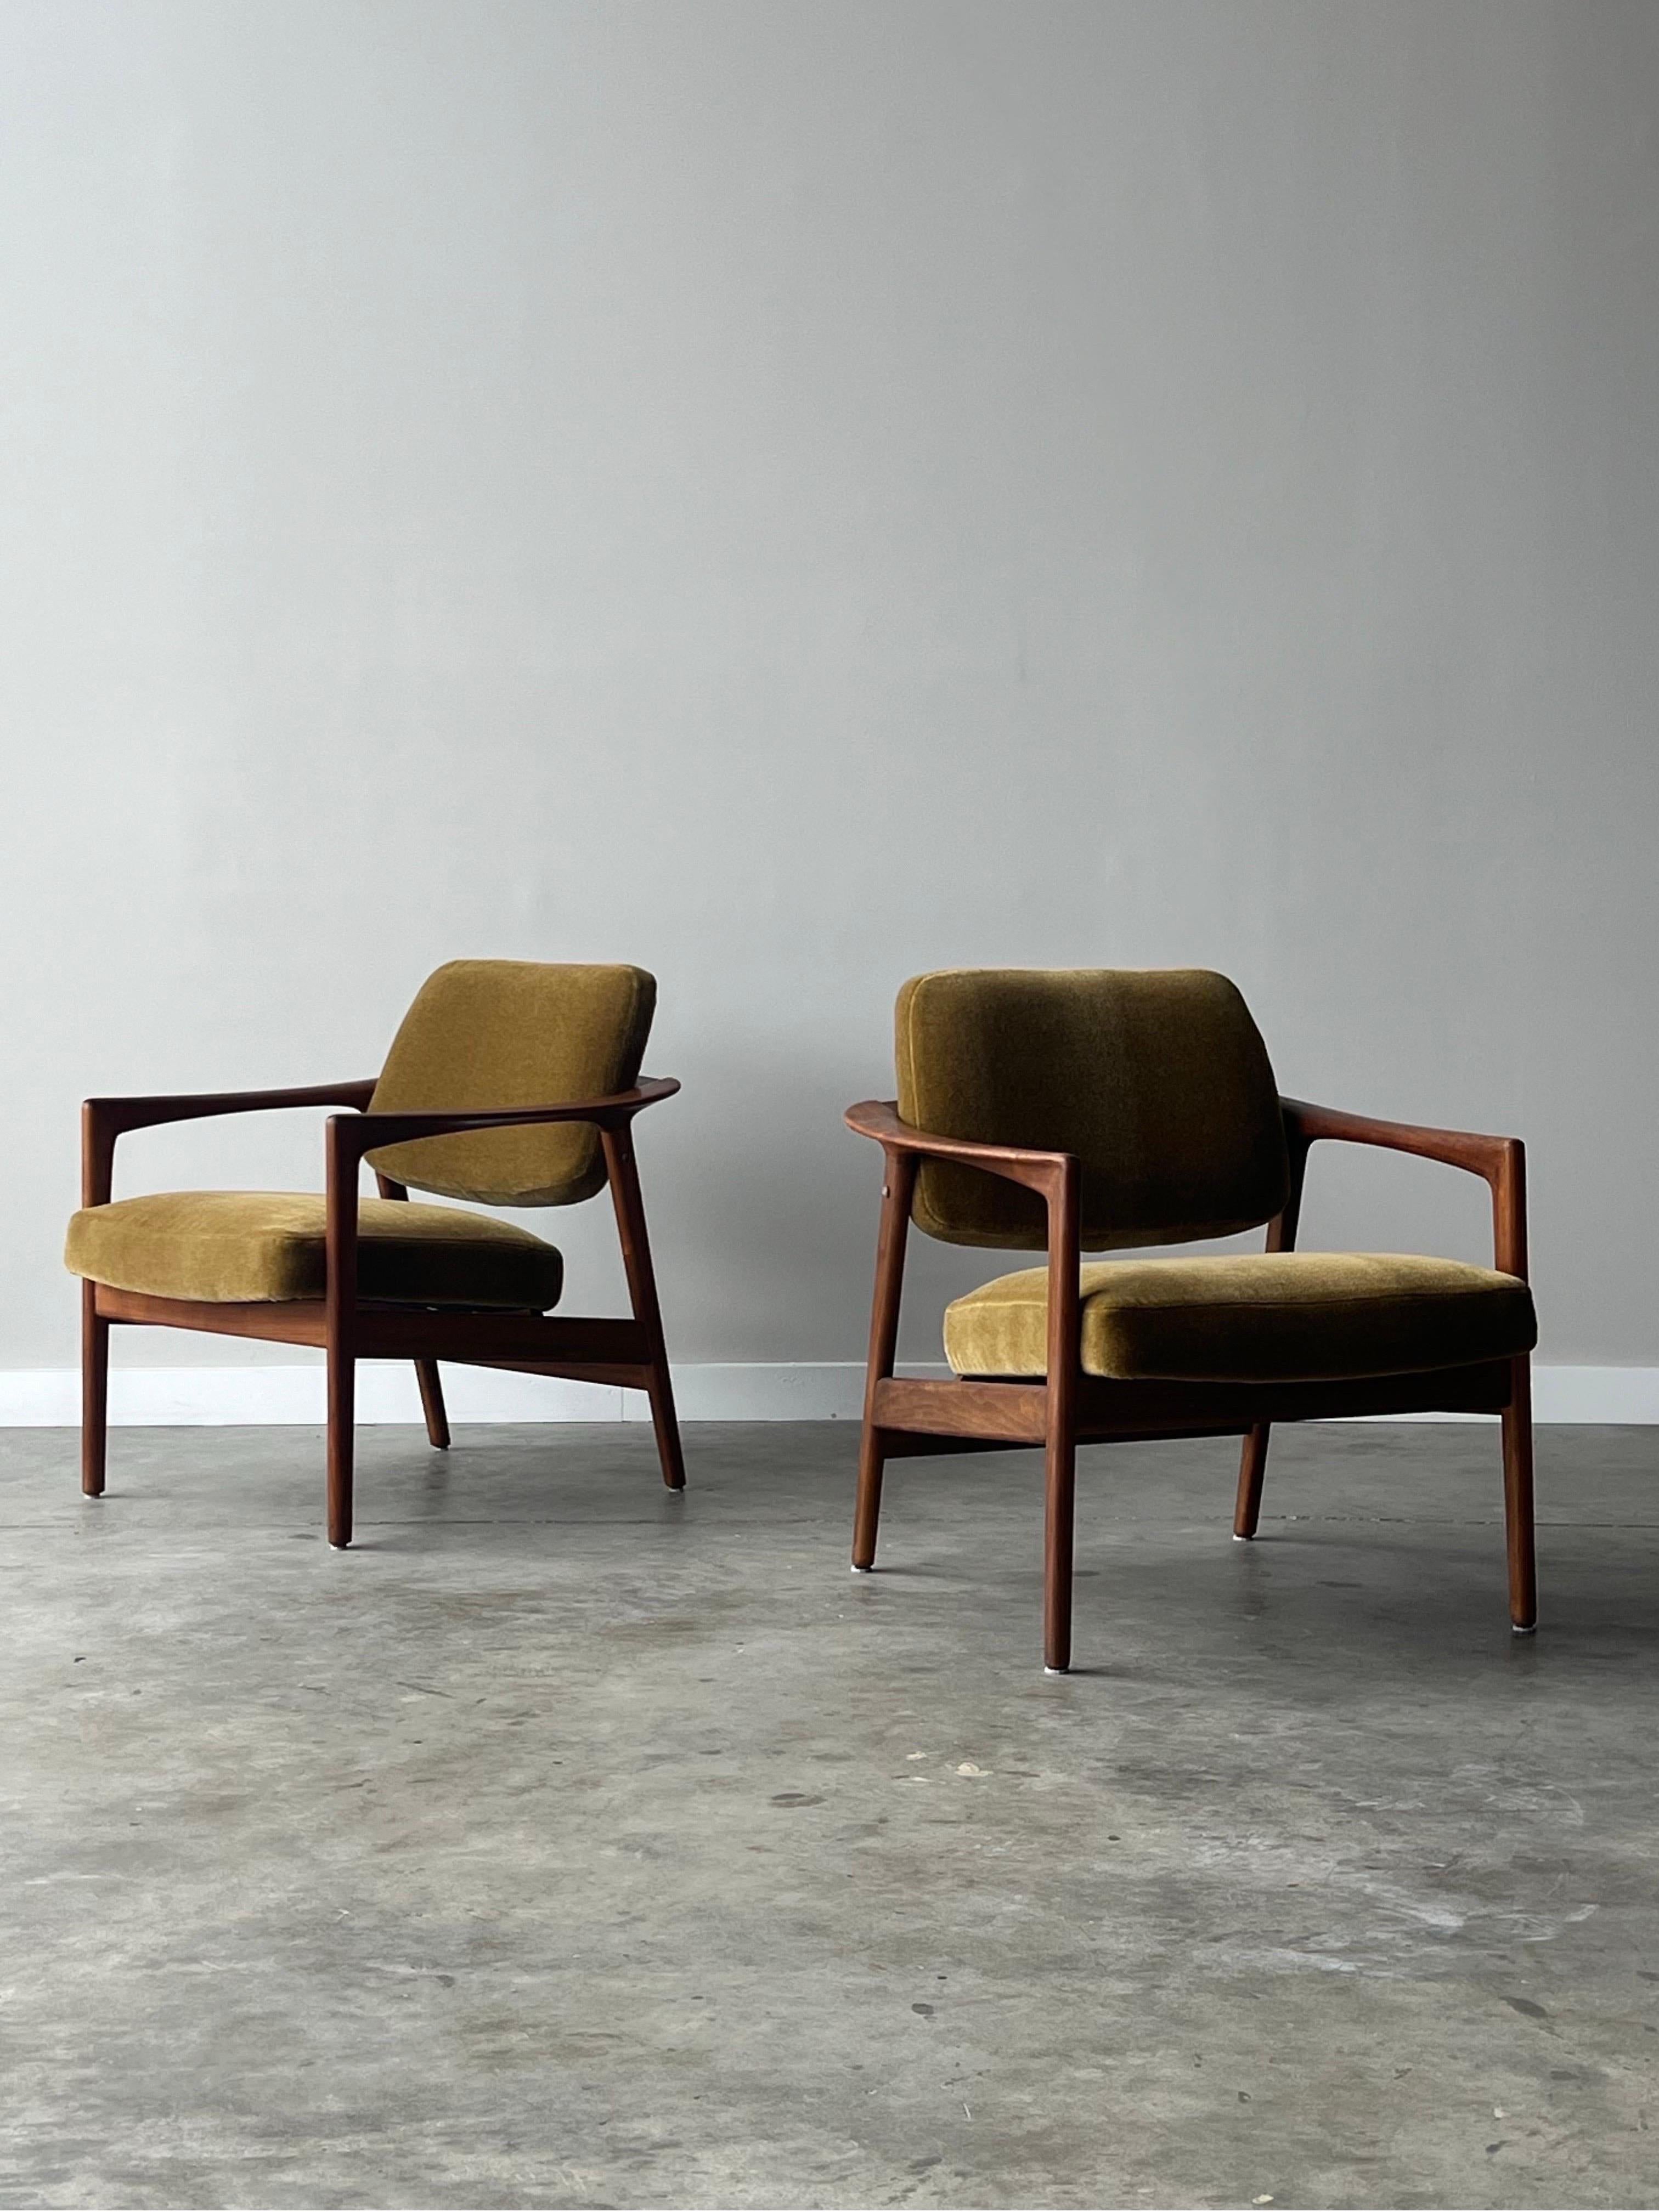 Mid Century Swedish Lounge Chairs by Folke Ohlsson for Dux. Upholstered in a warm golden yellow mohair fabric. These lounges are beautiful from all angles showcasing the exquisite Swedish design by framing the lounge in sculpted teak. A seldom seen